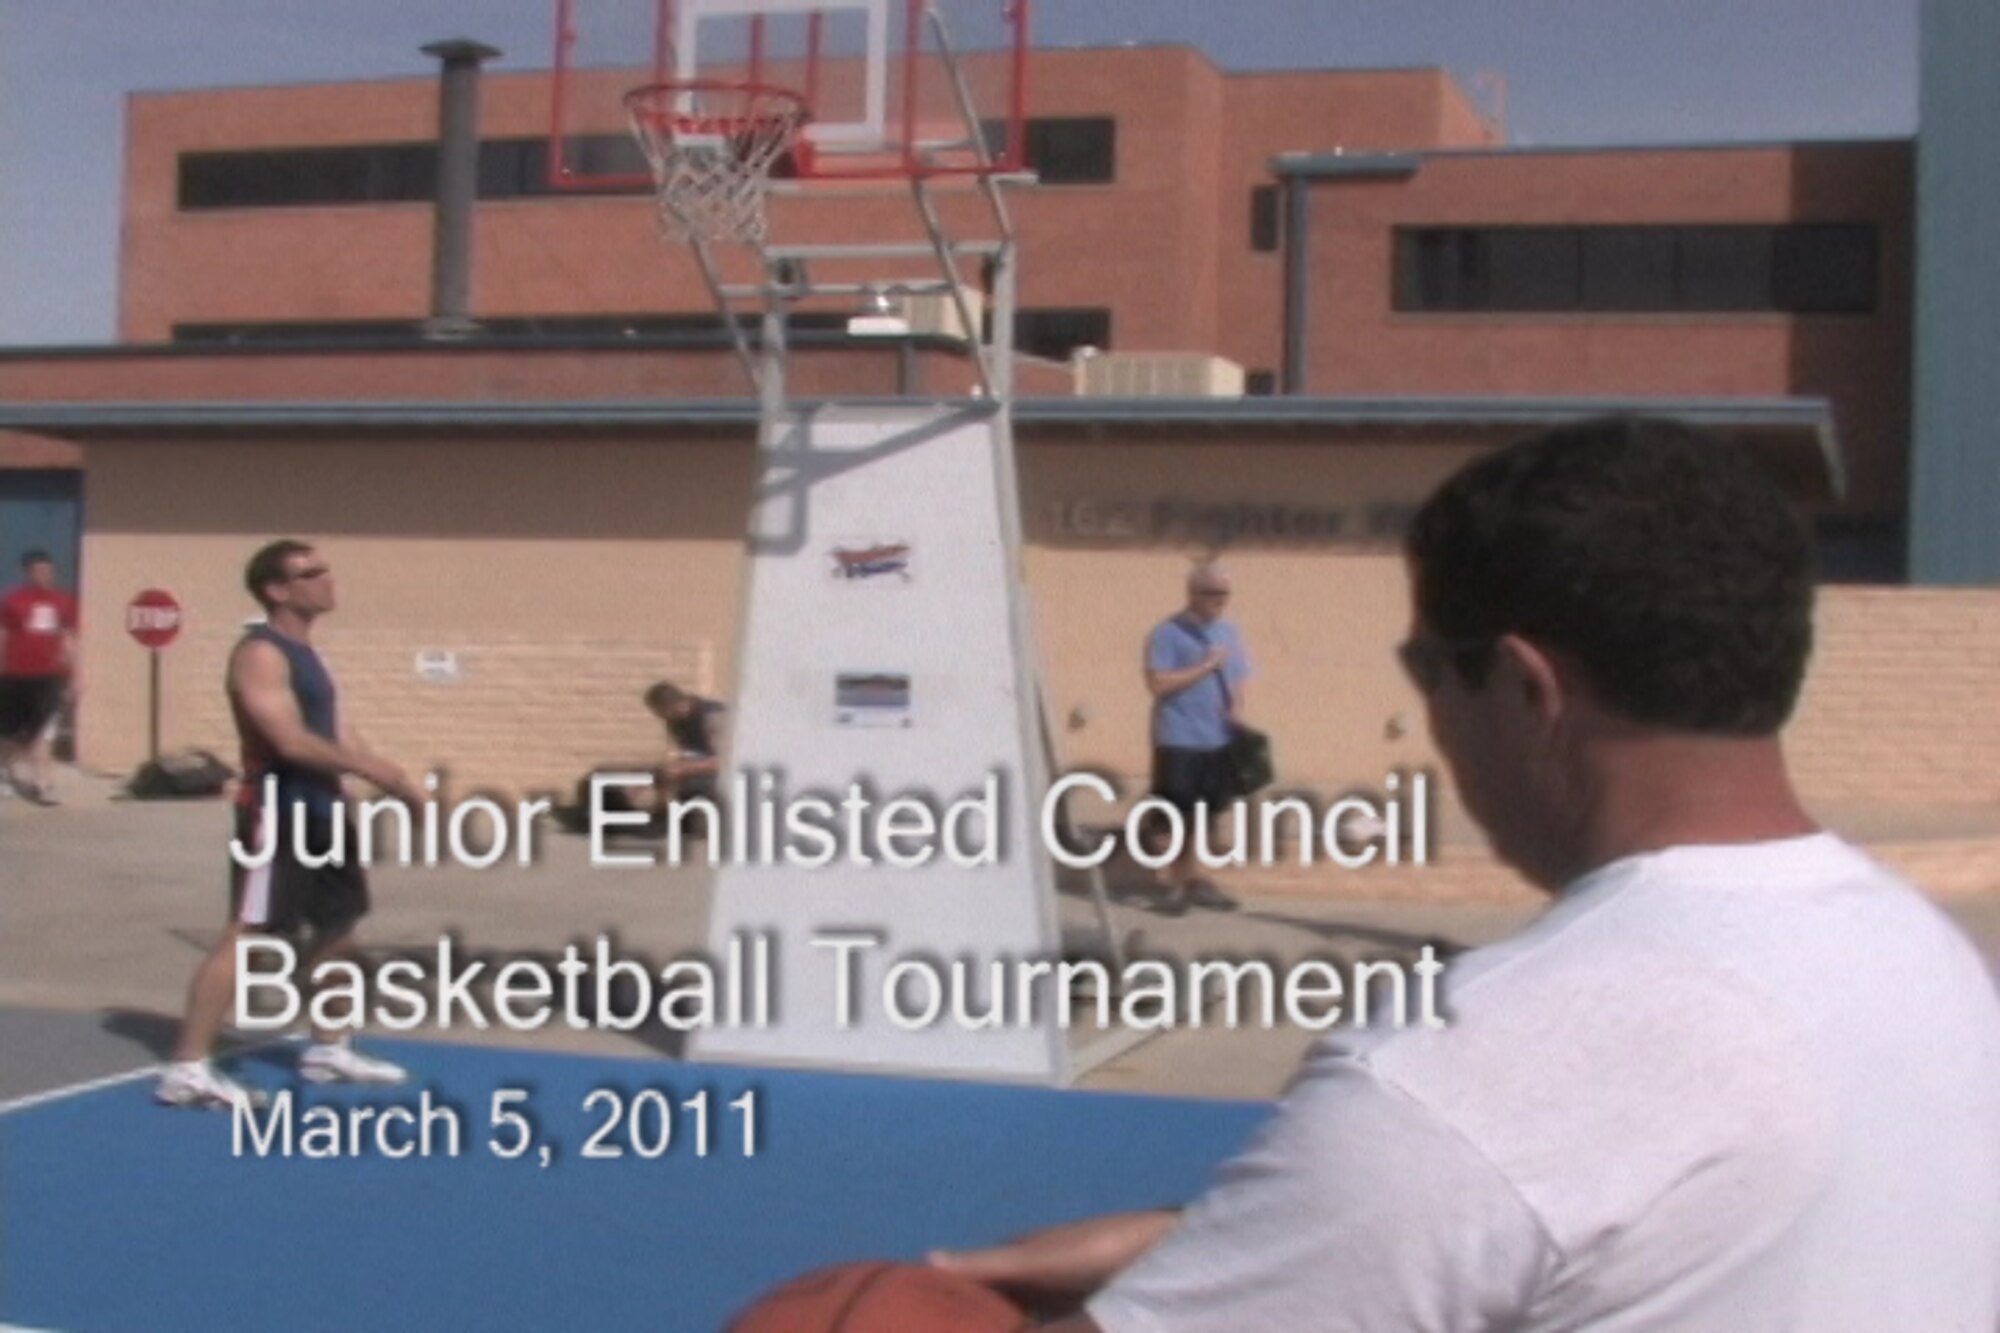 The 162nd Fighter Wing's Junior Enlisted Council organized a basketball tournament on base, March 5. Watch the video news clip here.